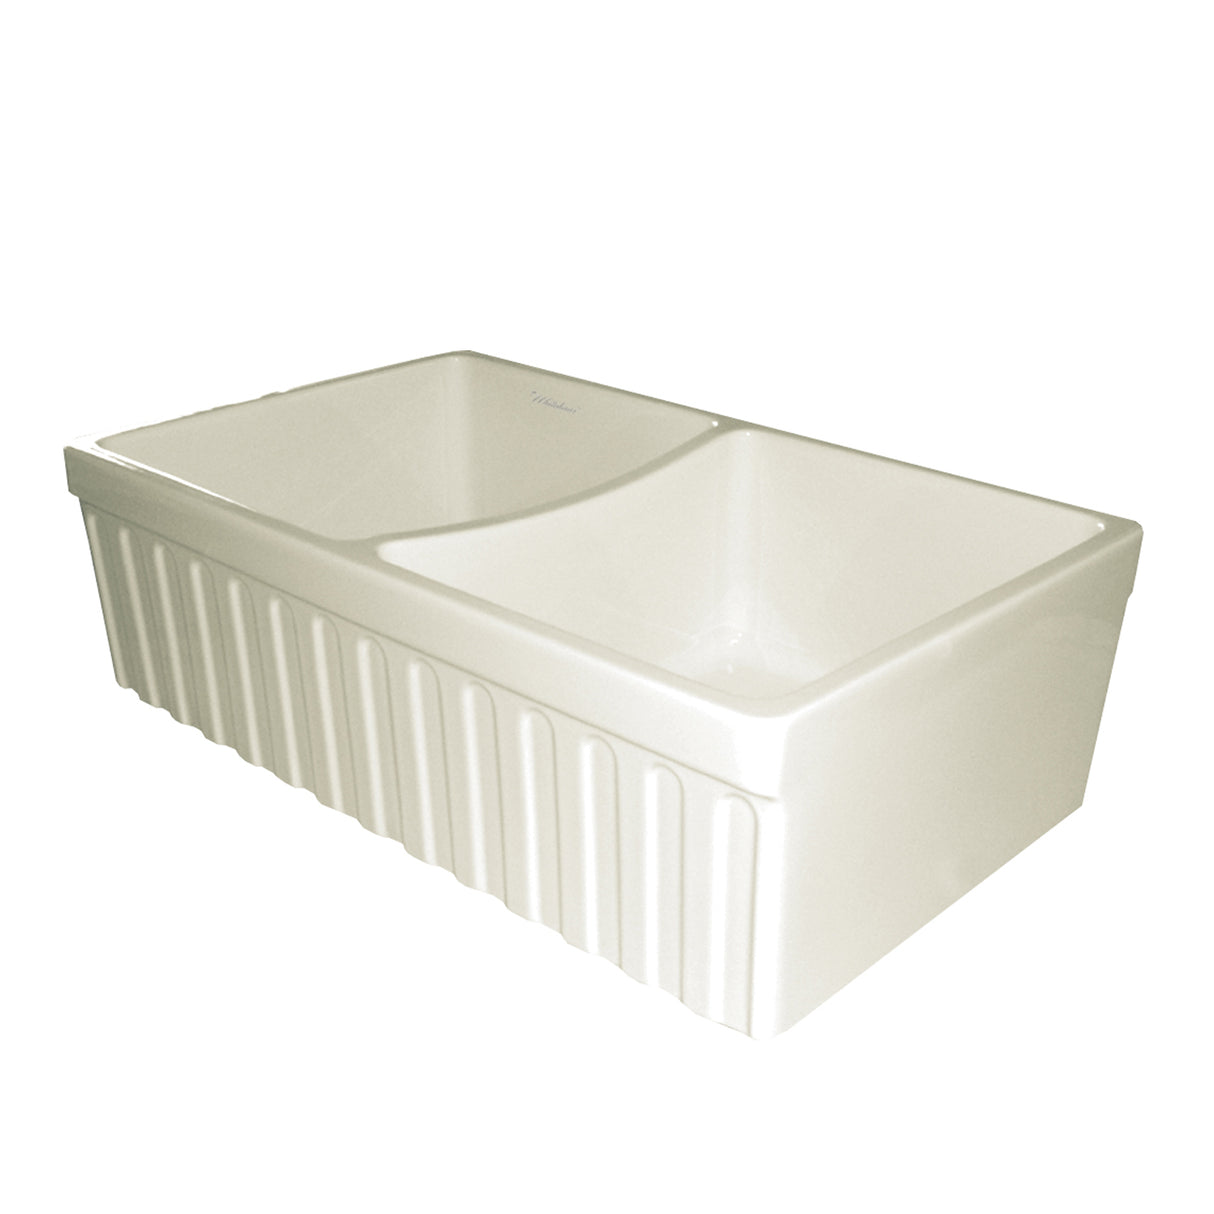 Farmhaus Fireclay Quatro Alcove Reversible Double Bowl Sink with a Fluted Front Apron and 2" Lip on One Side and 2 ½" Lip on the Opposite Side